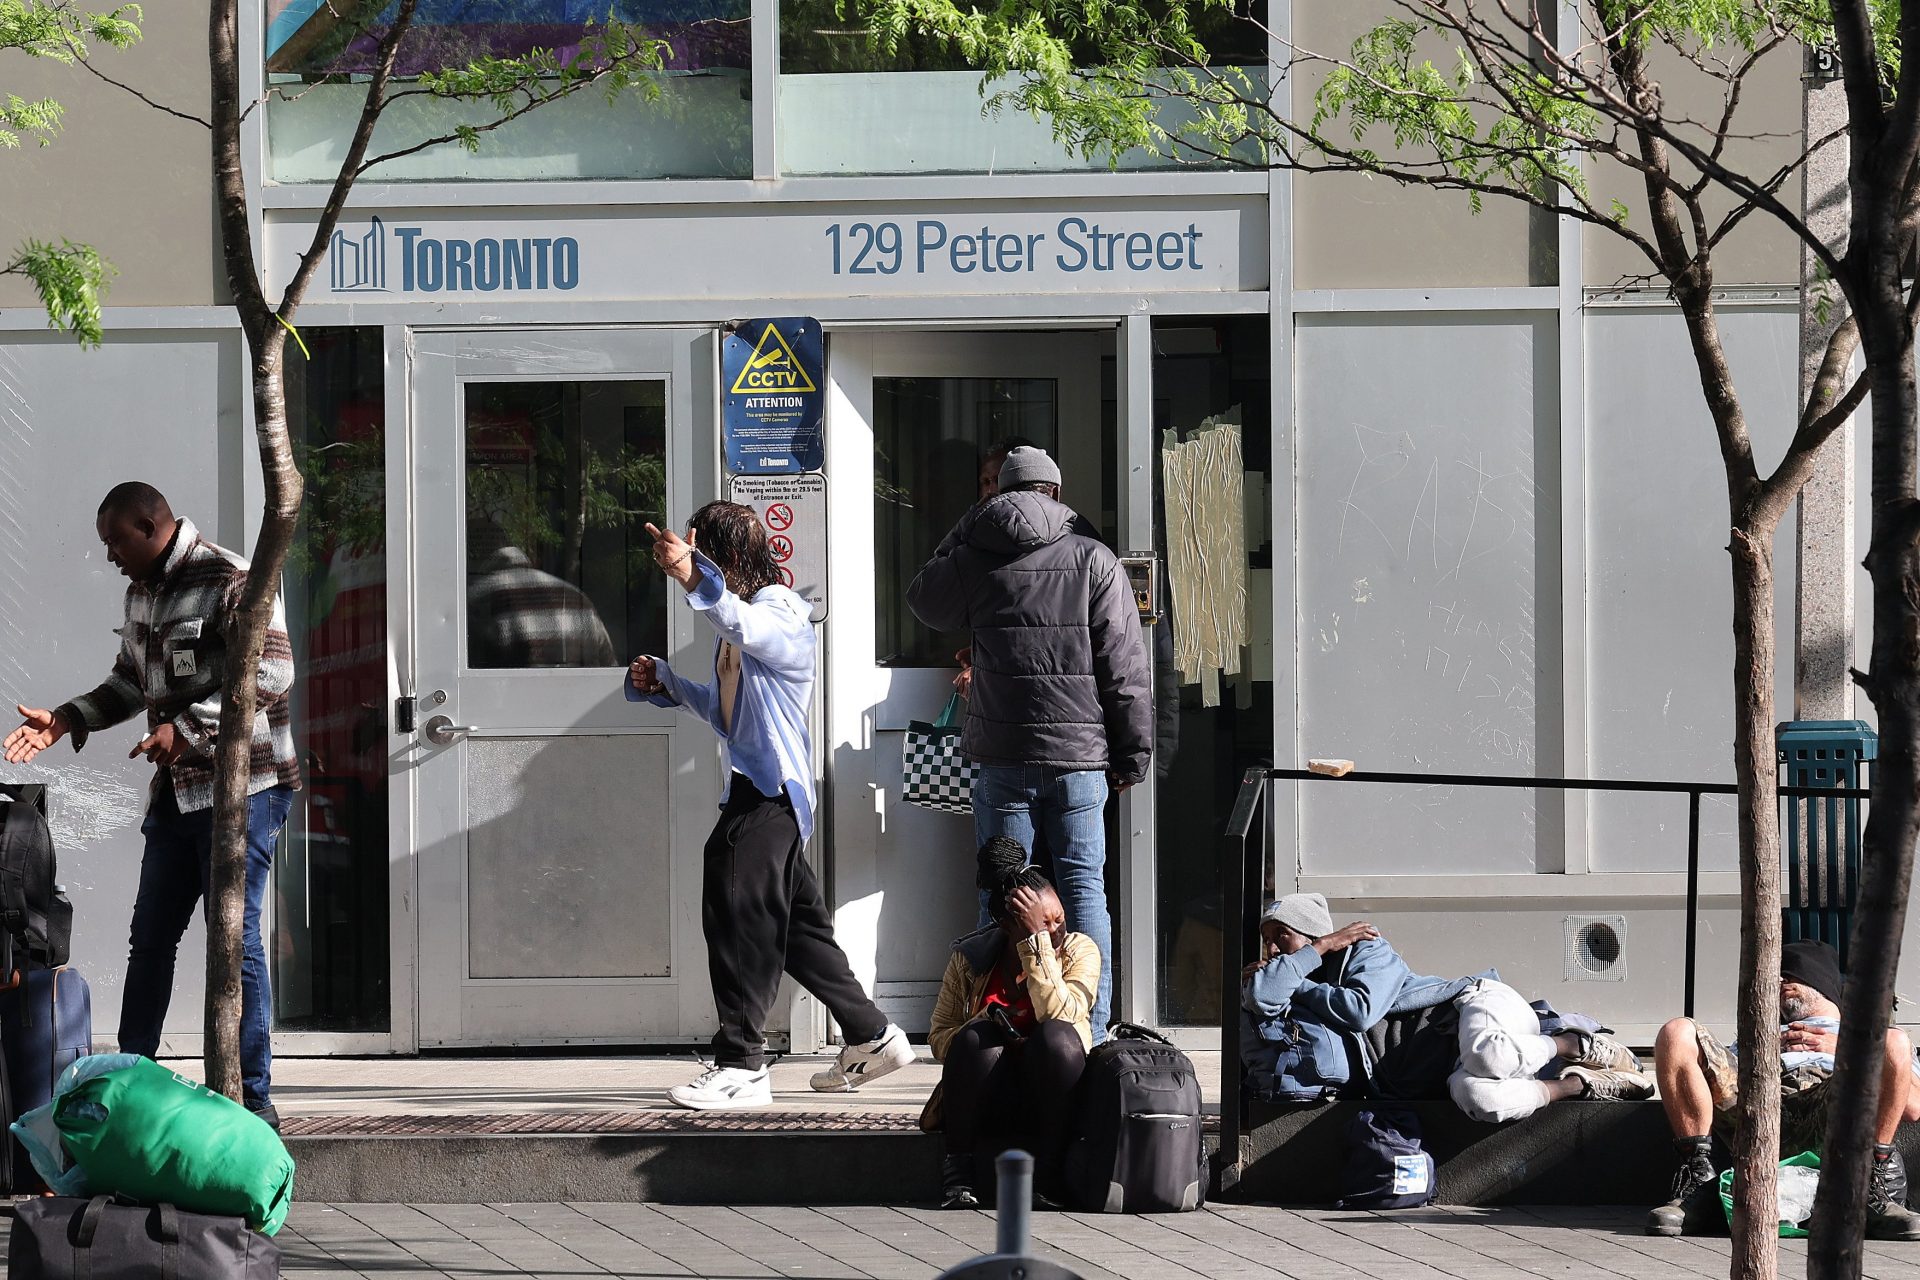 Why can't the government seem to help homeless Canadians?